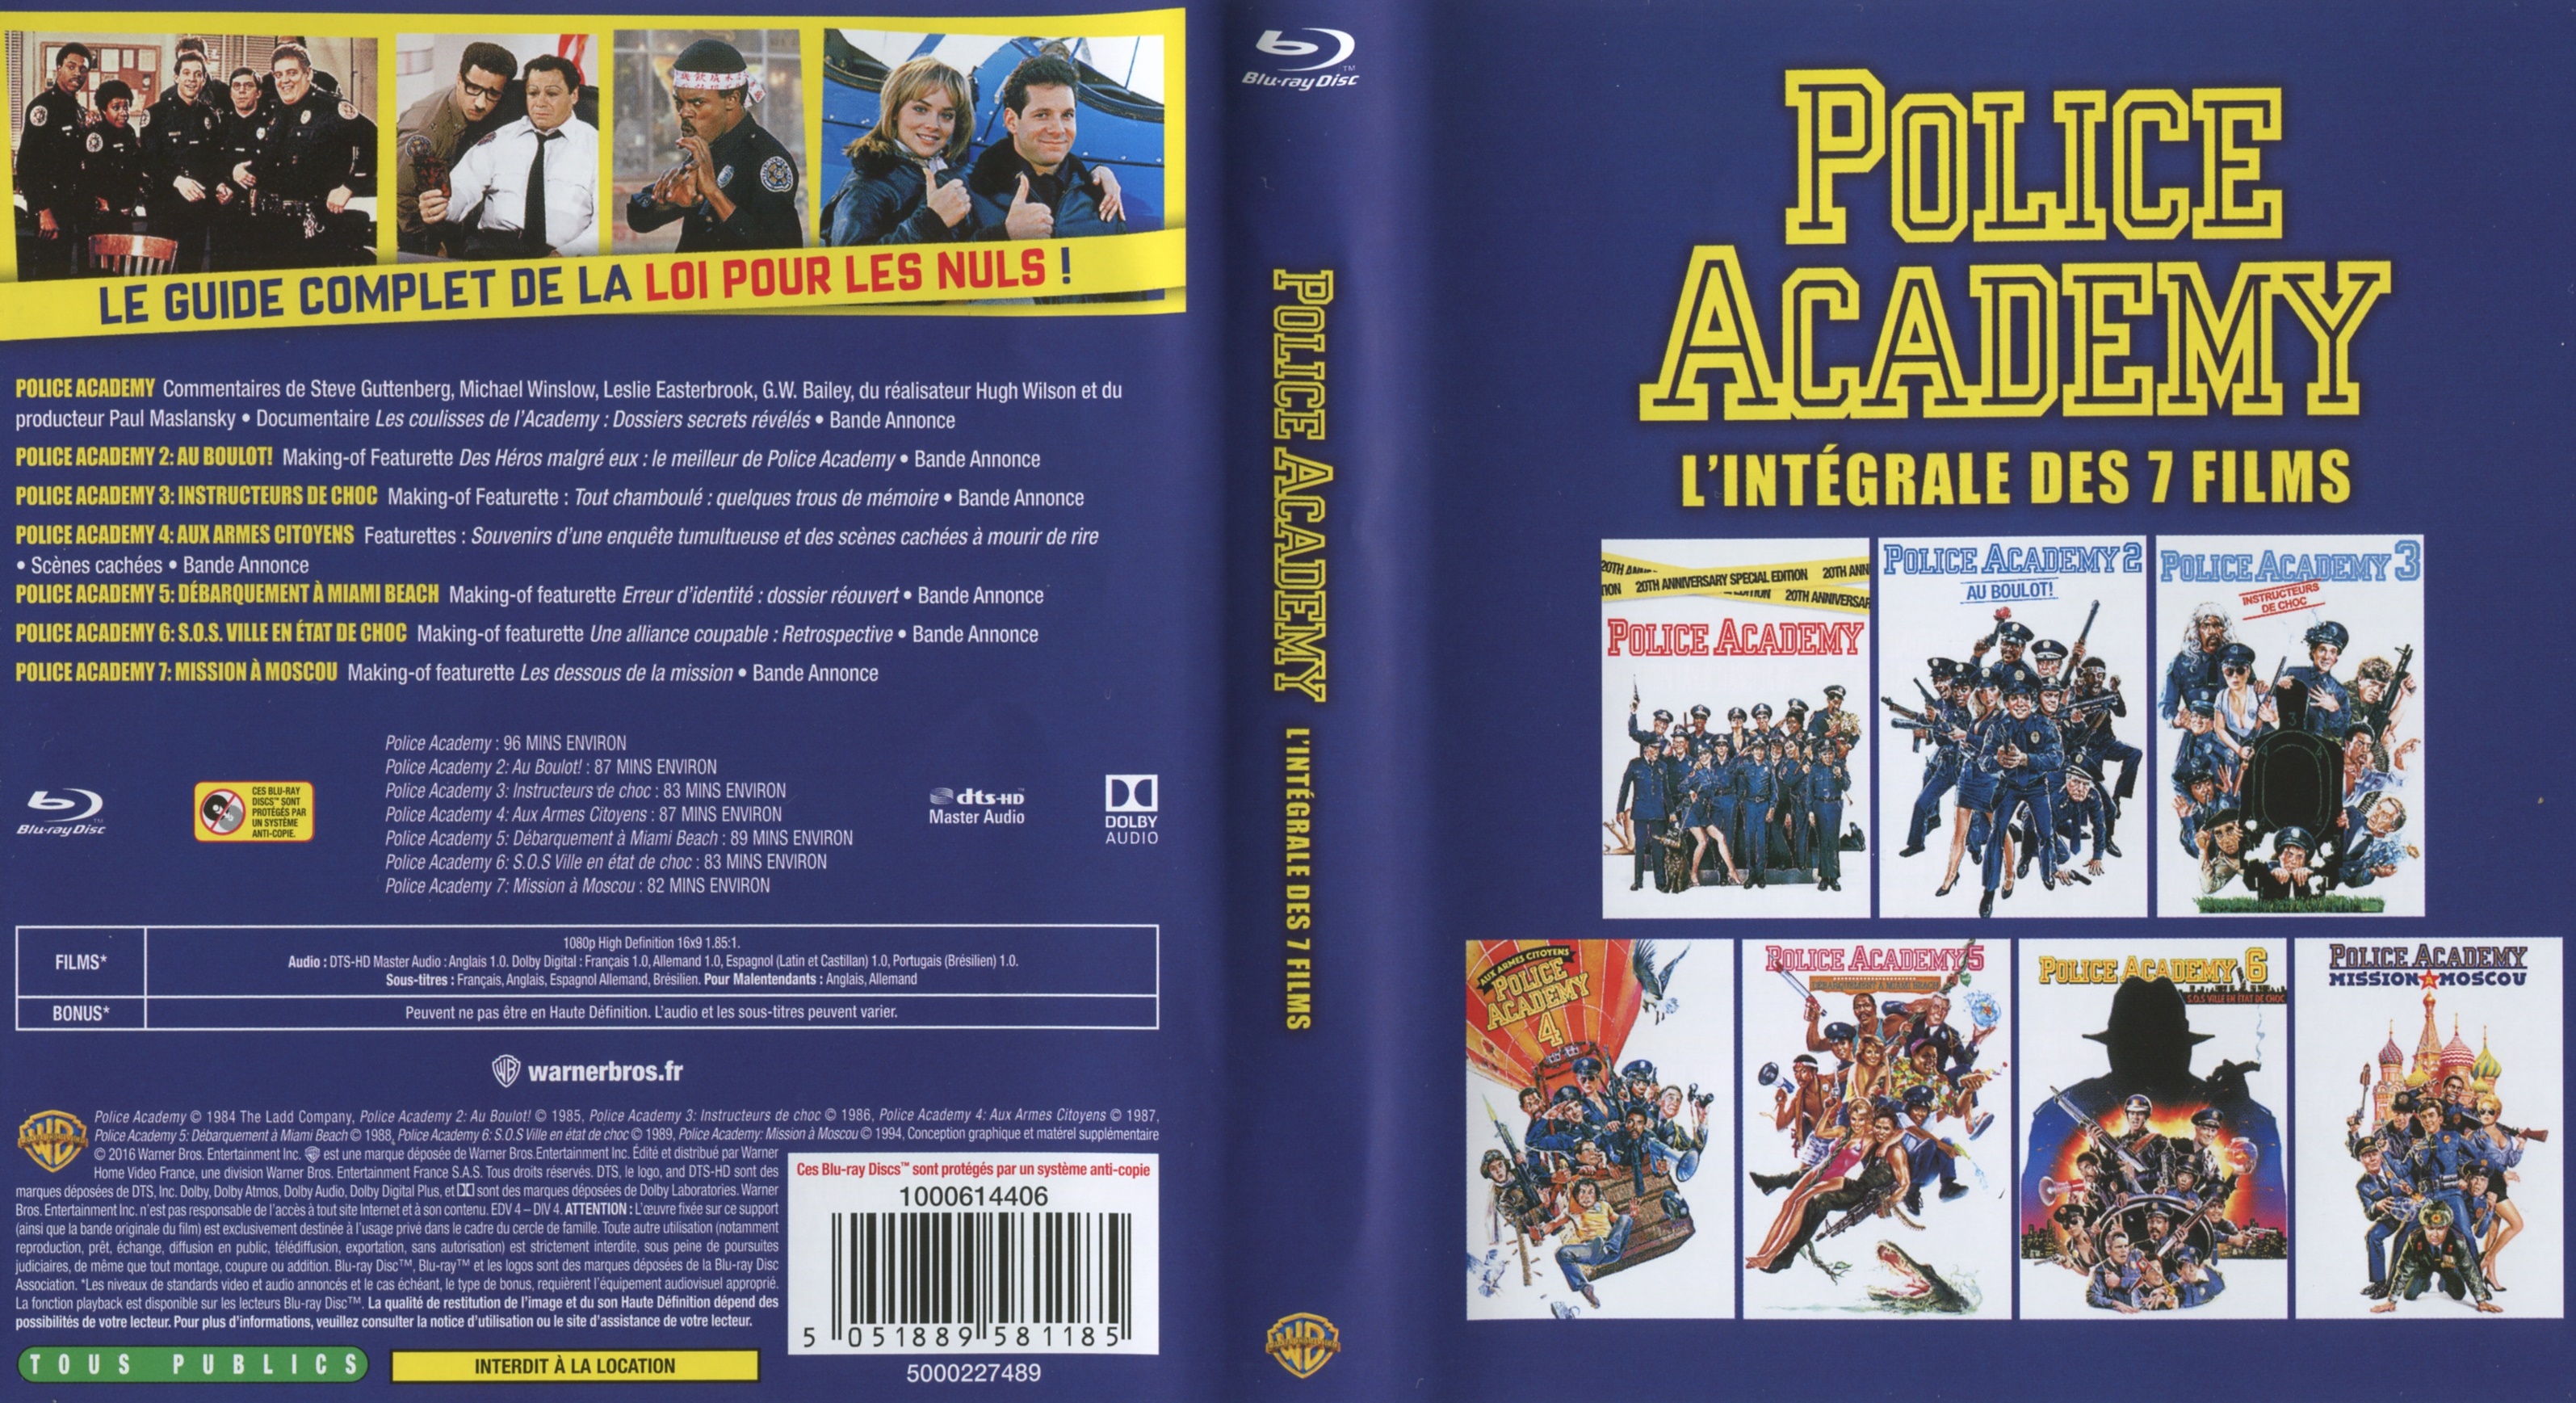 Jaquette DVD Police academy COFFRET (BLU-RAY)